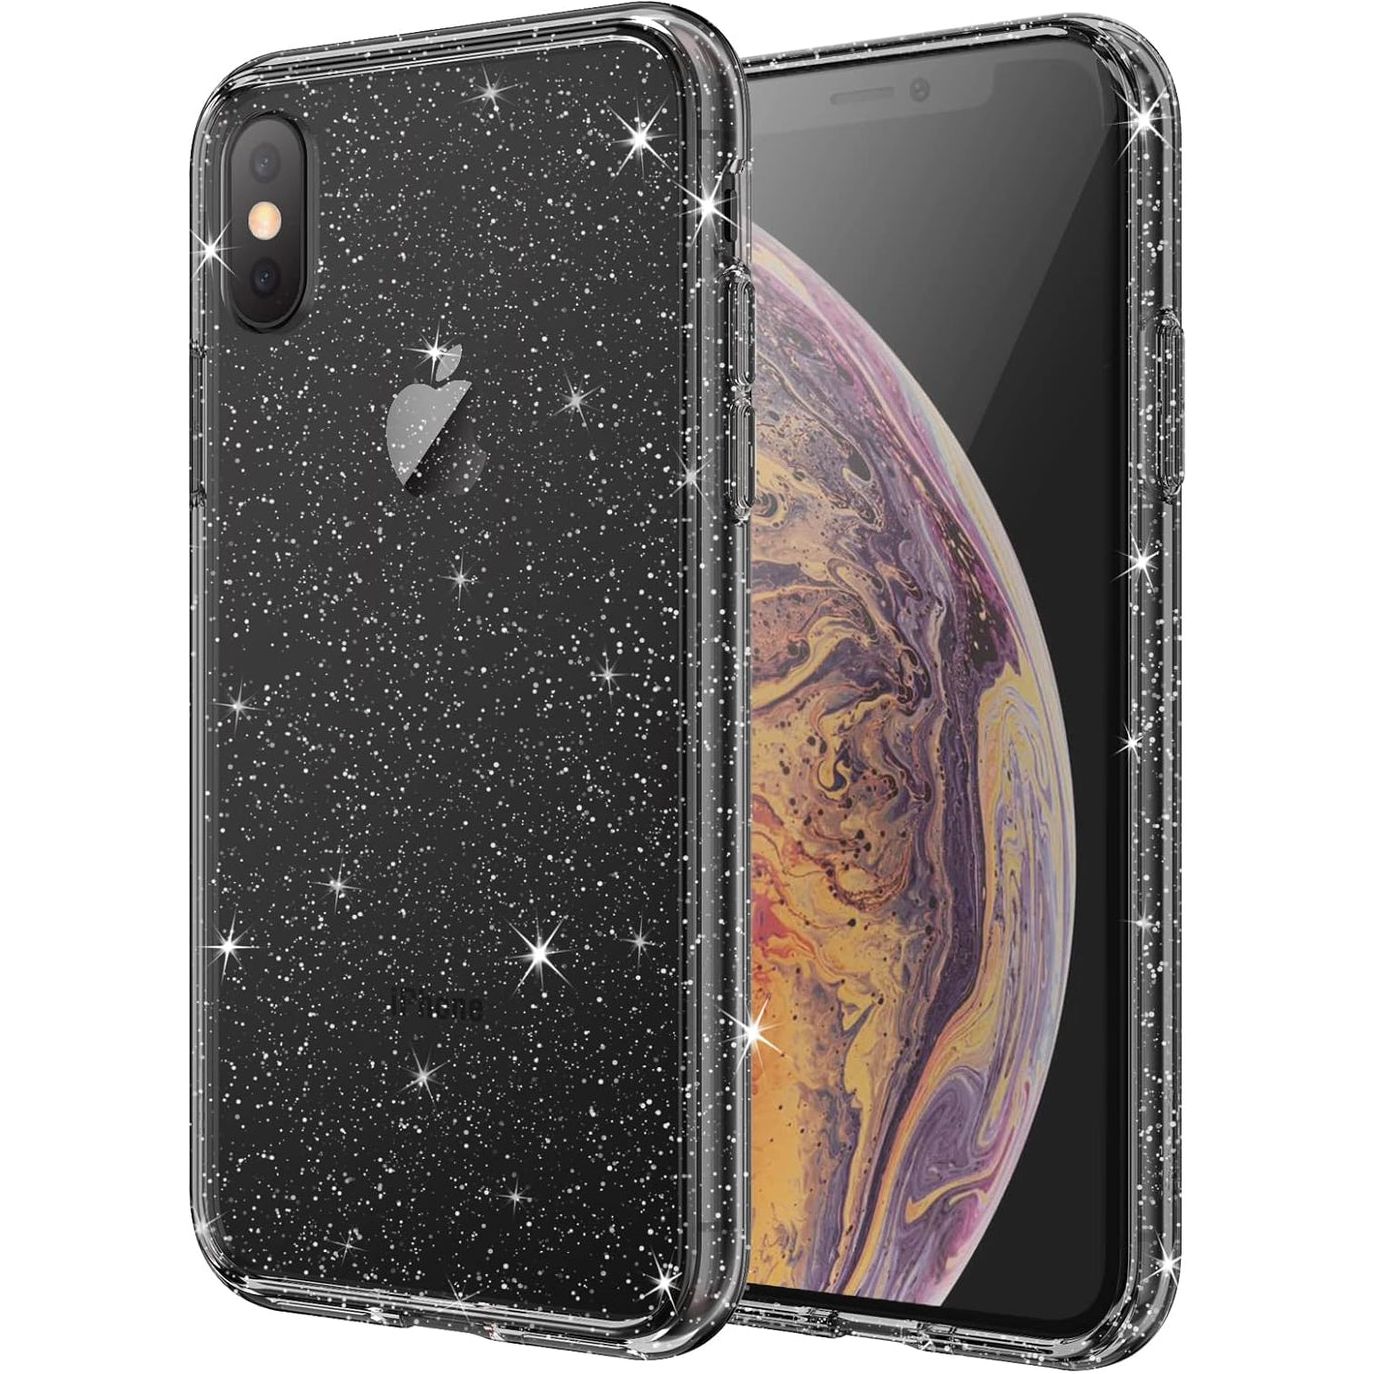 iP XS Max ALL Clear Cases